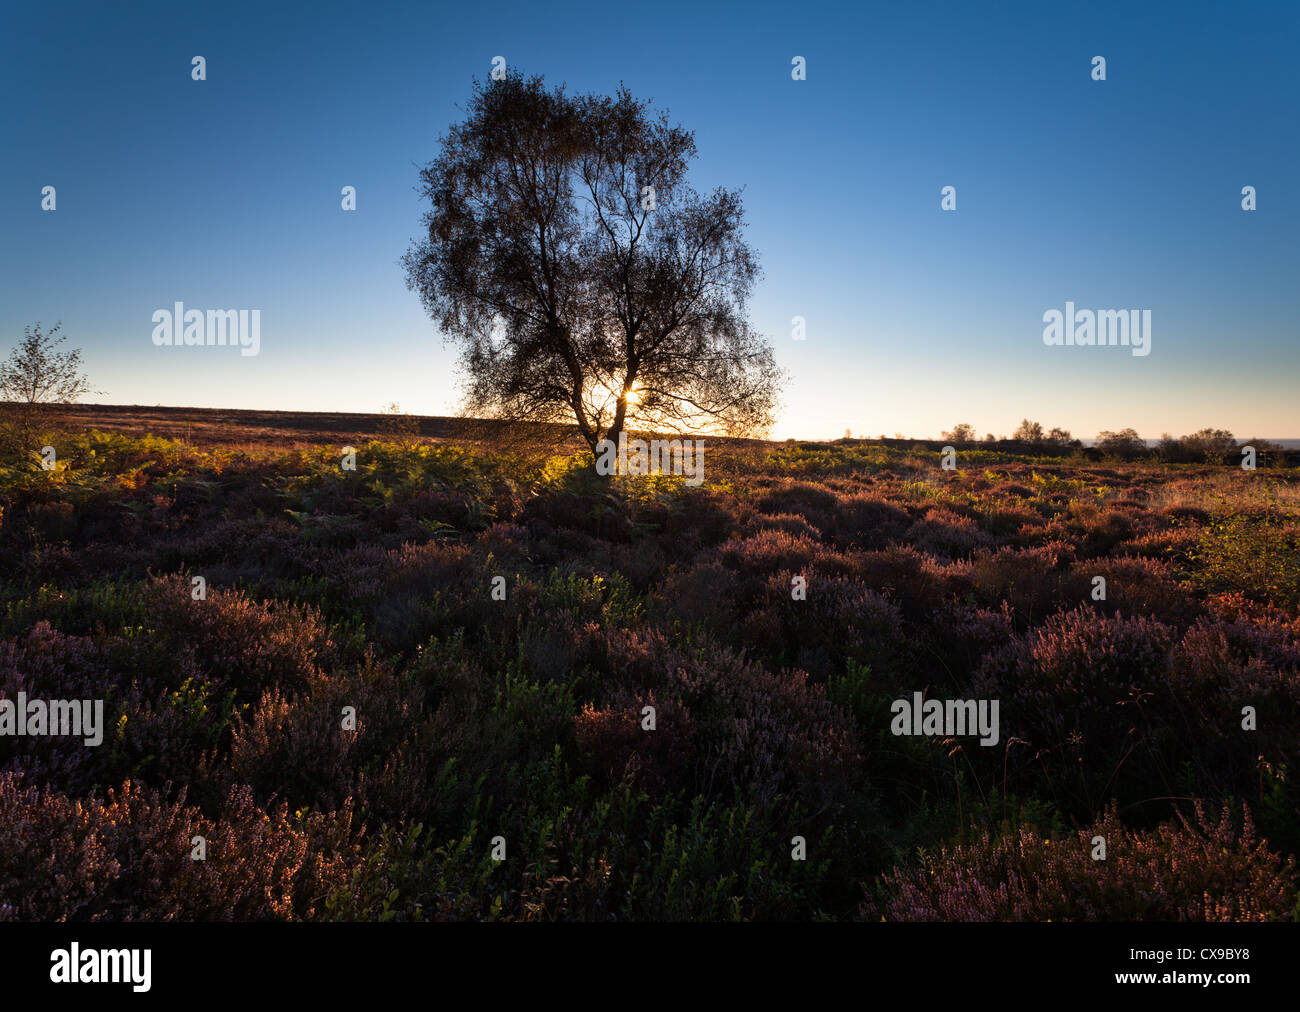 Heather On The Moors In The Yorkshire Dales At Sunrise Stock Photo Alamy